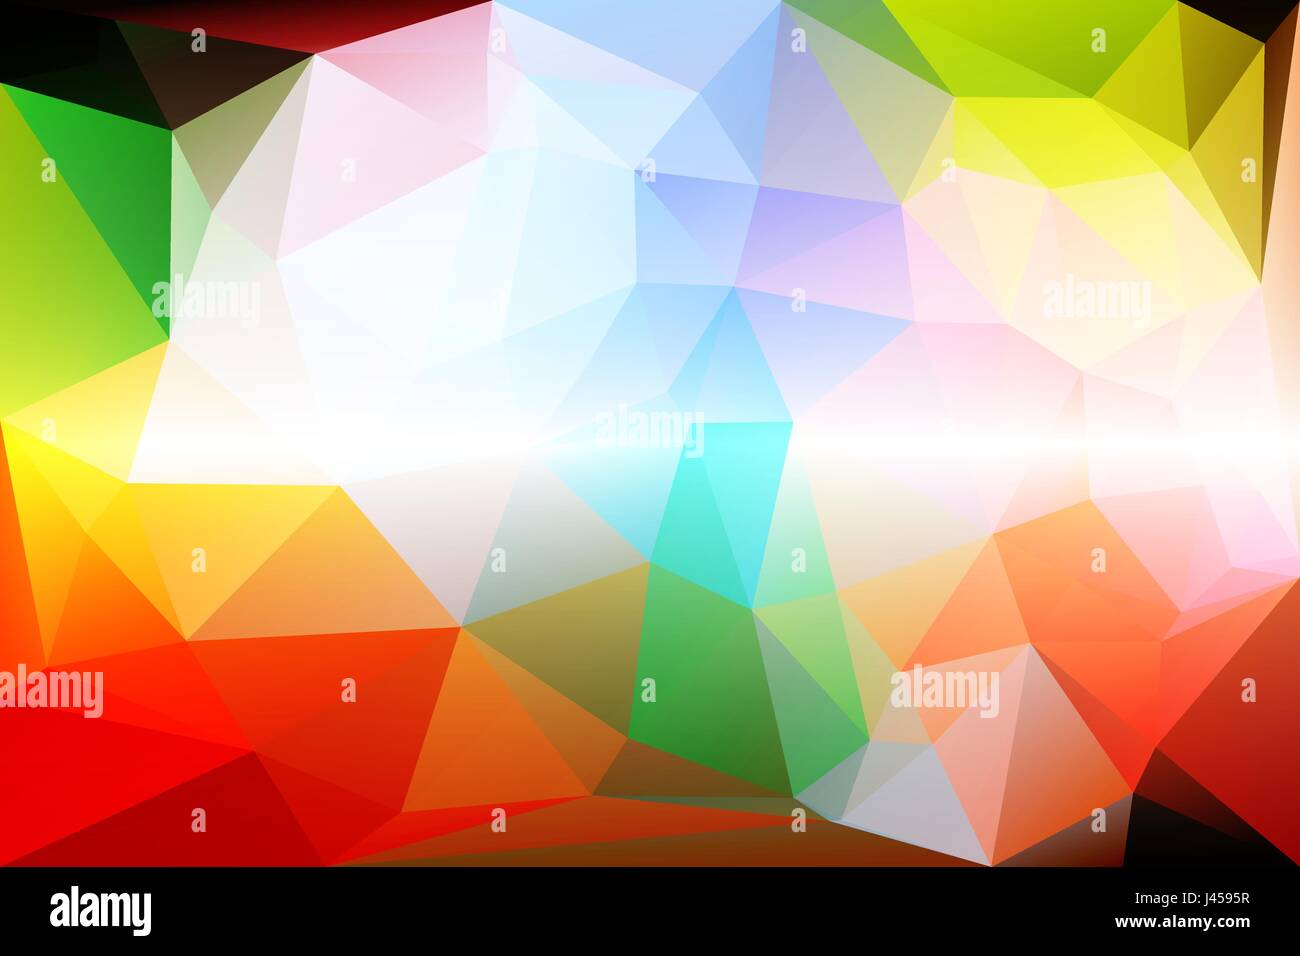 Rainbow colors abstract low poly geometric background Stock Vector